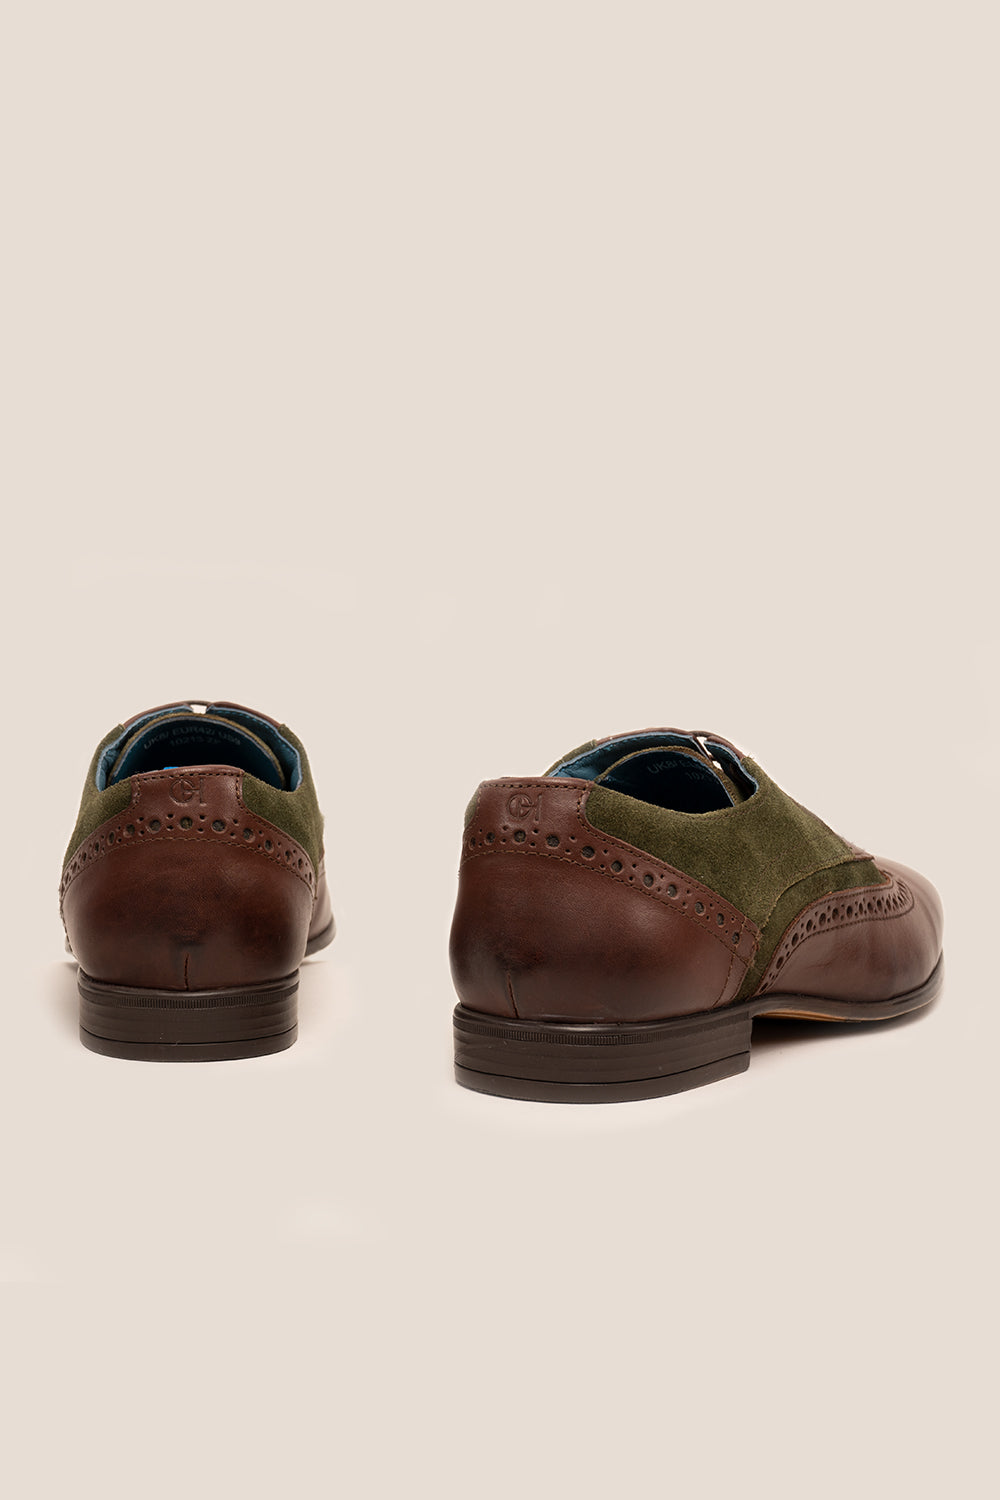 Miles Brown Green Leather/Suede Brogue Shoes Oswin Hyde